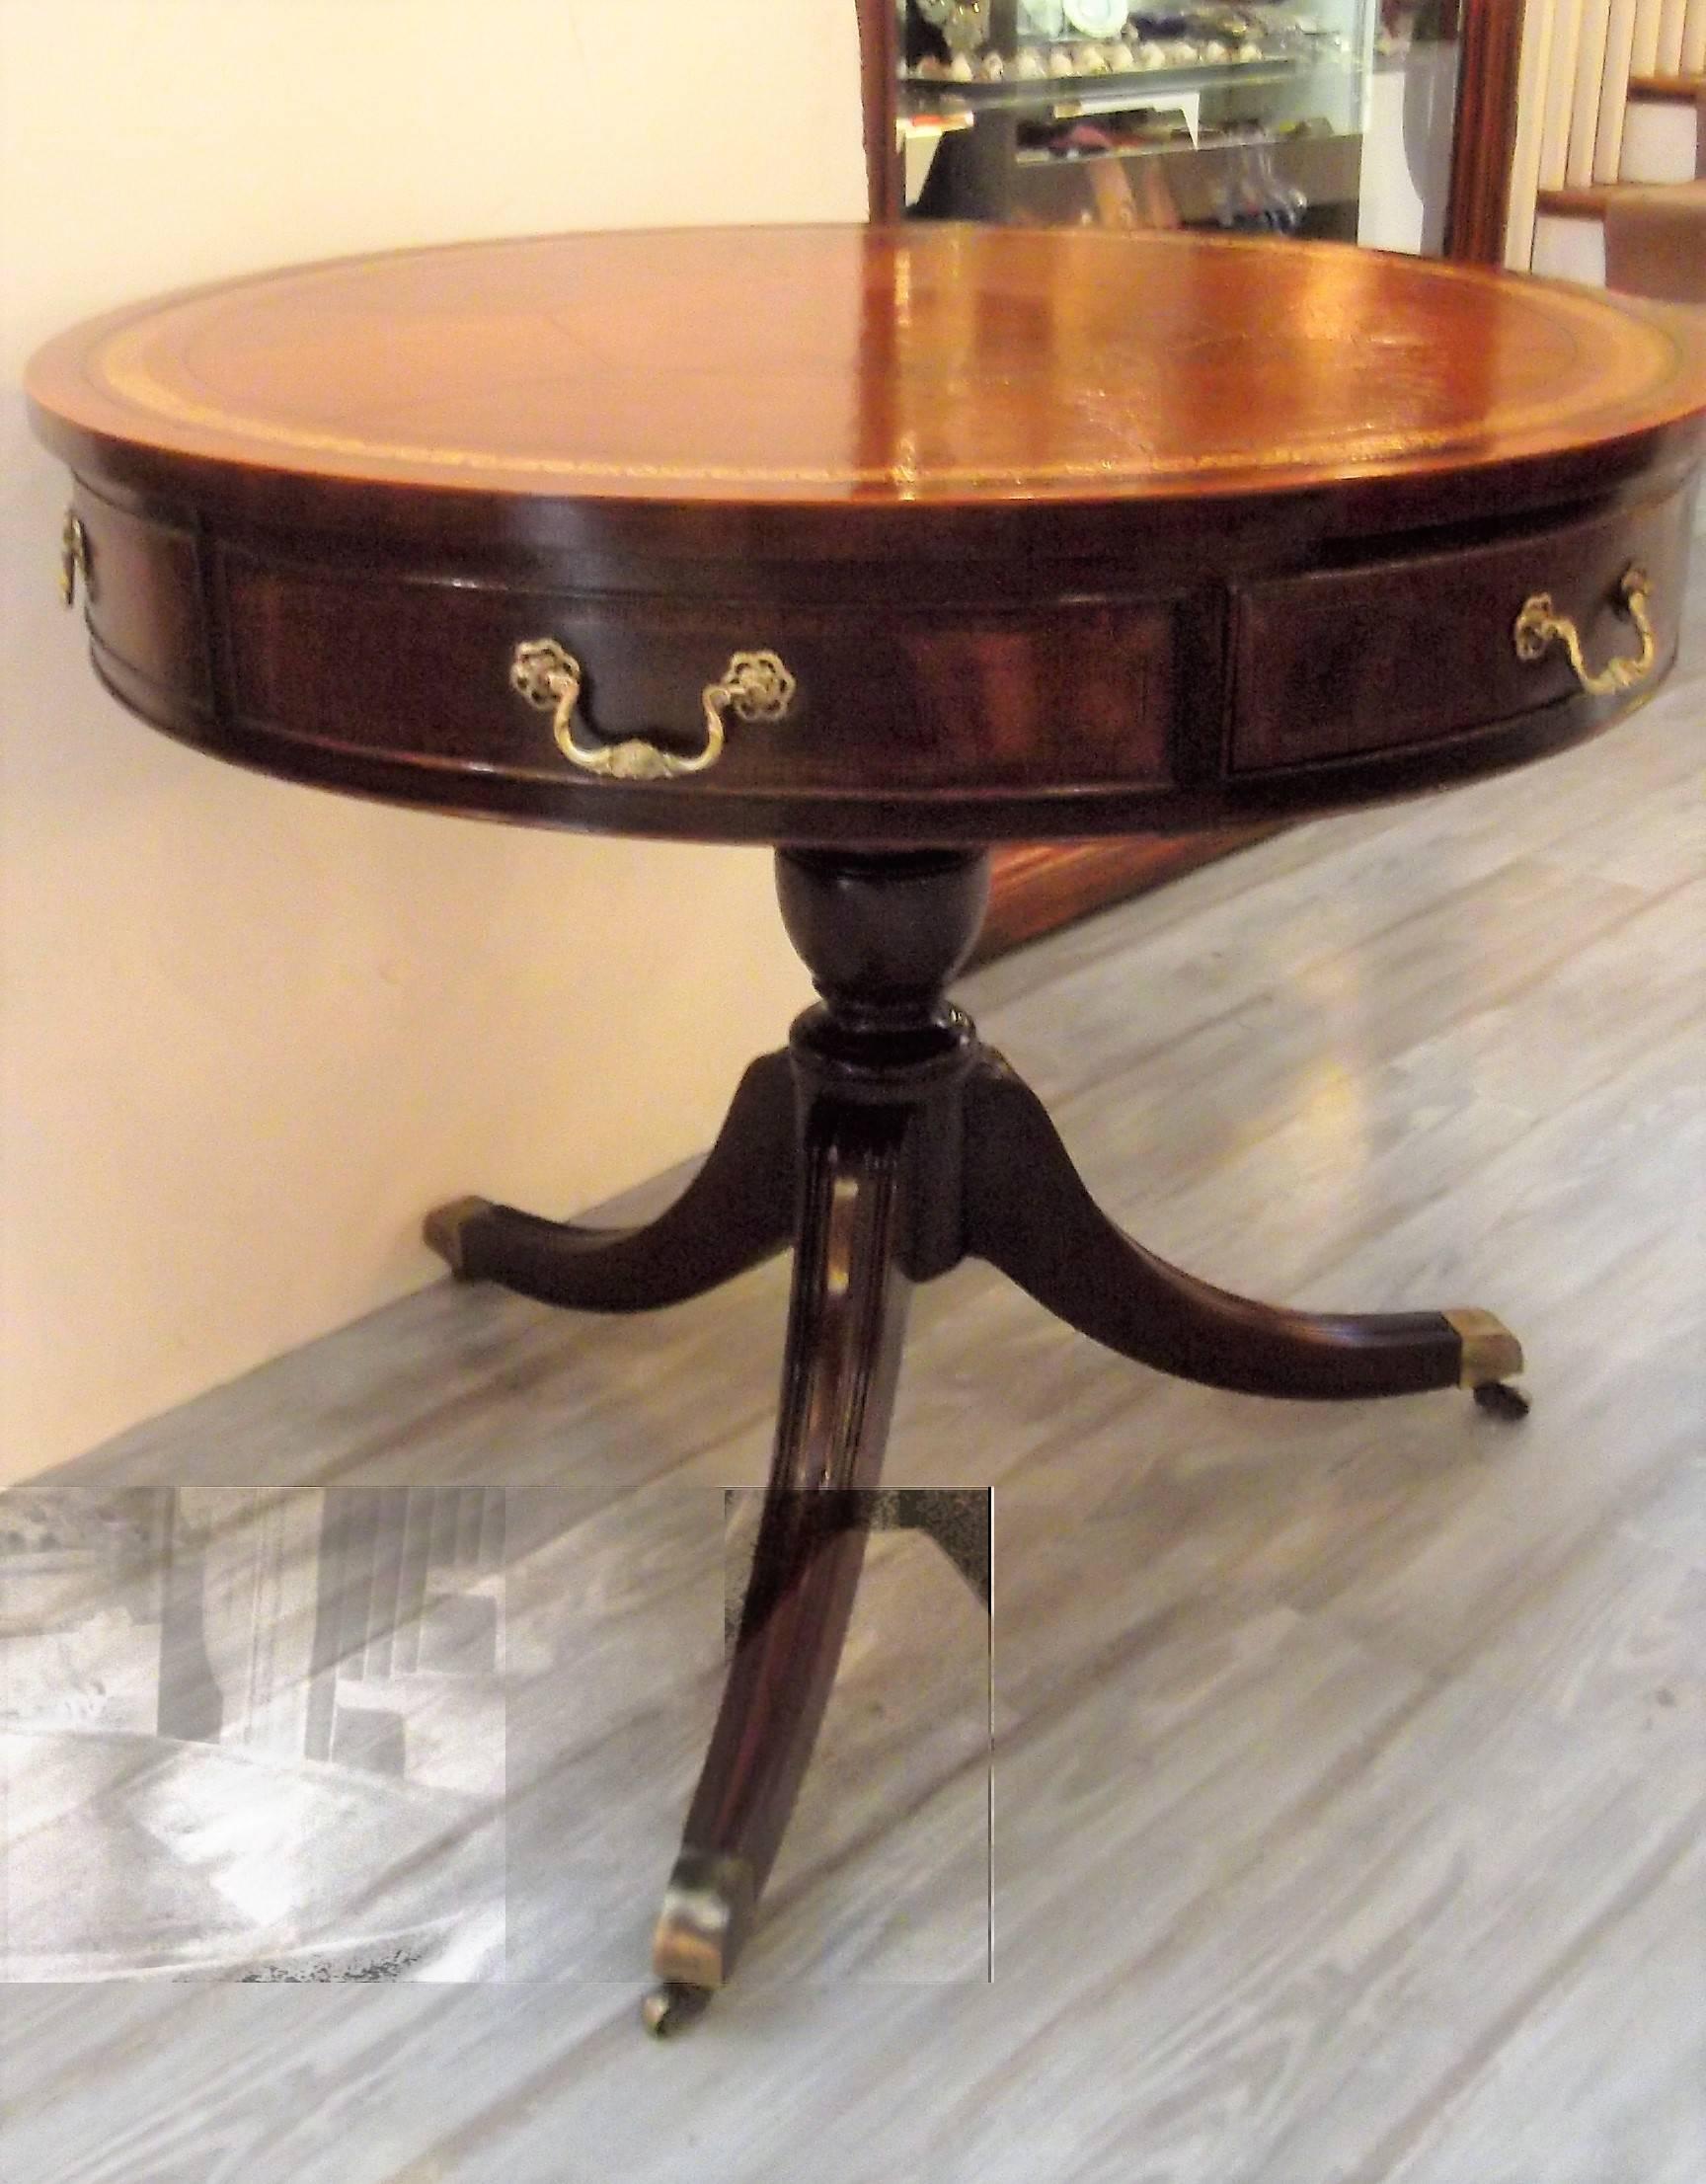 Round mahogany drum table with aged leather gilt tooled top. The apron appears to have six drawers with cast brass handles. The front and back drawers are working drawers. The top is in very good condition but does show some well cared for use and